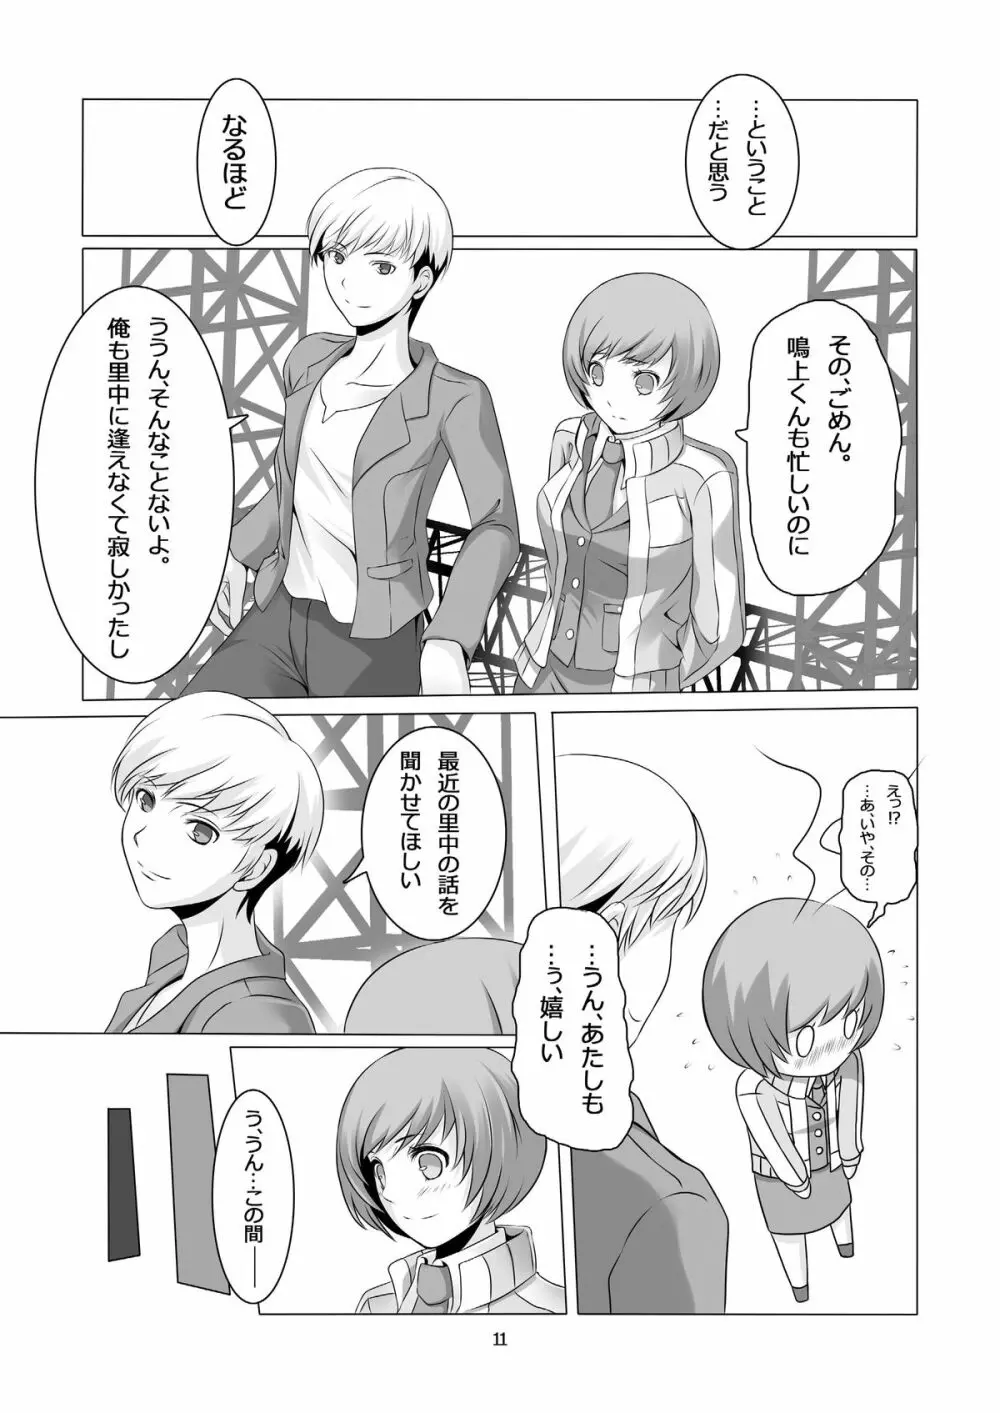 Persona 4: The Doujin #2 - page13